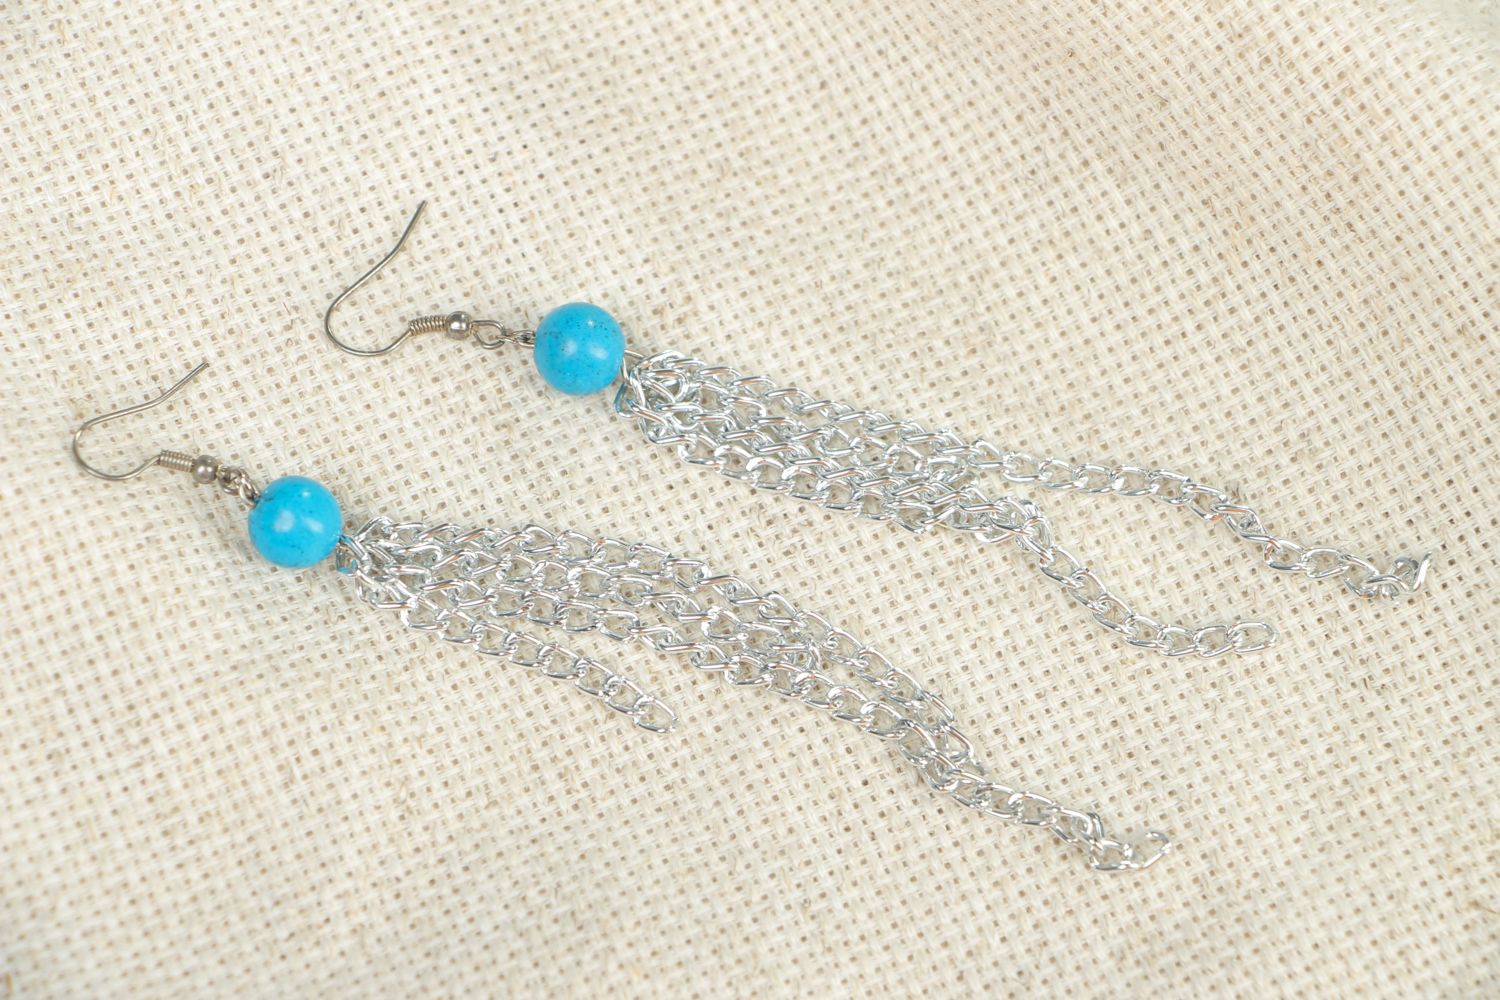 Metal earrings with chains and beads photo 4